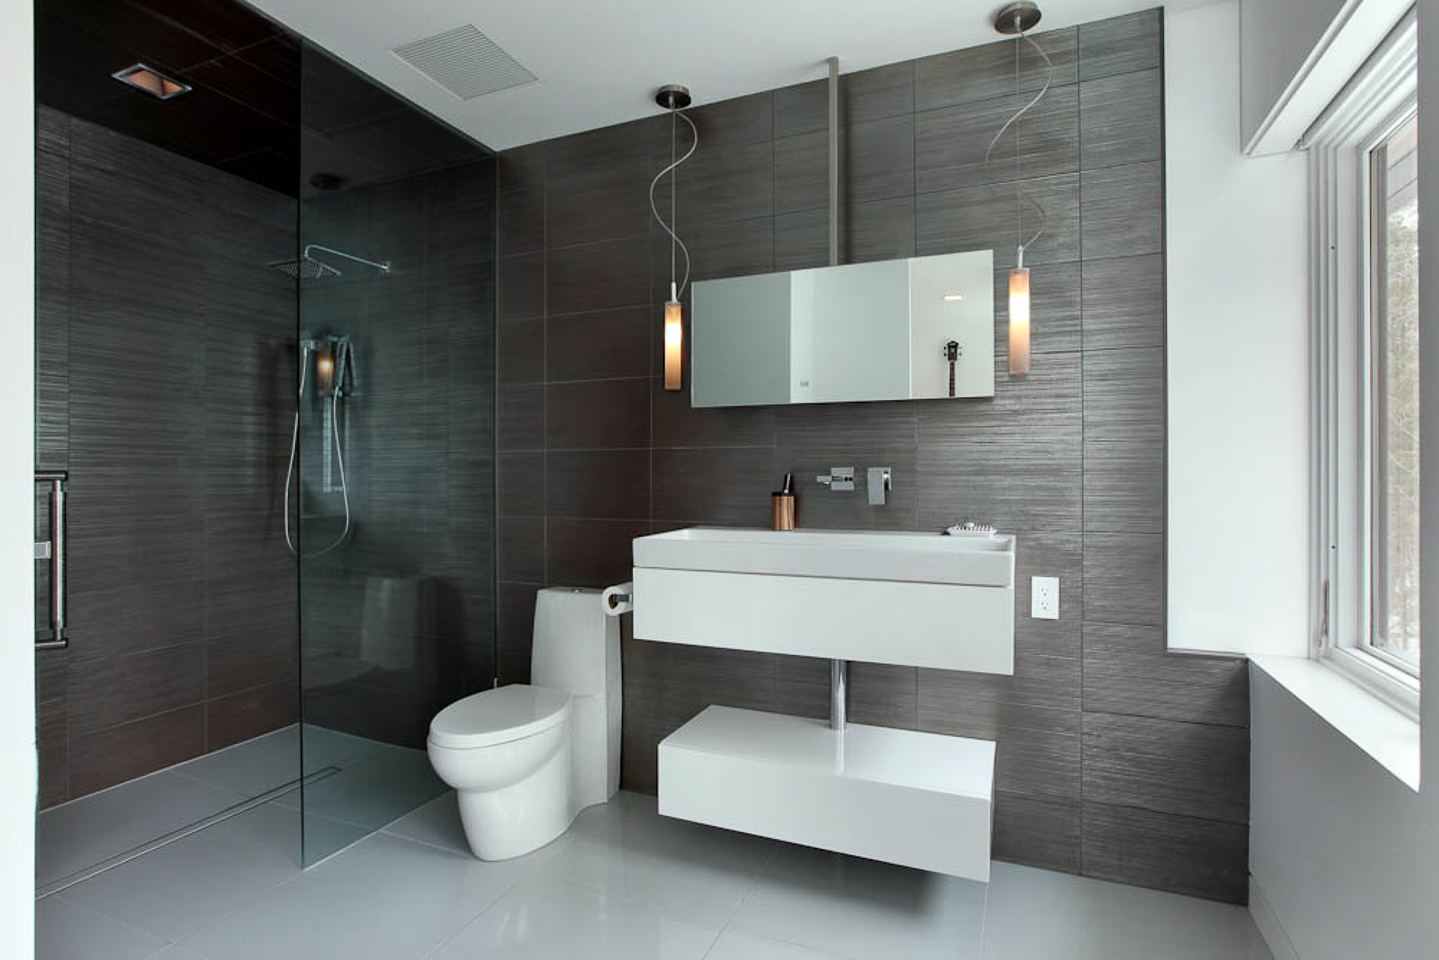 tile showers and baths, backsplashes, features